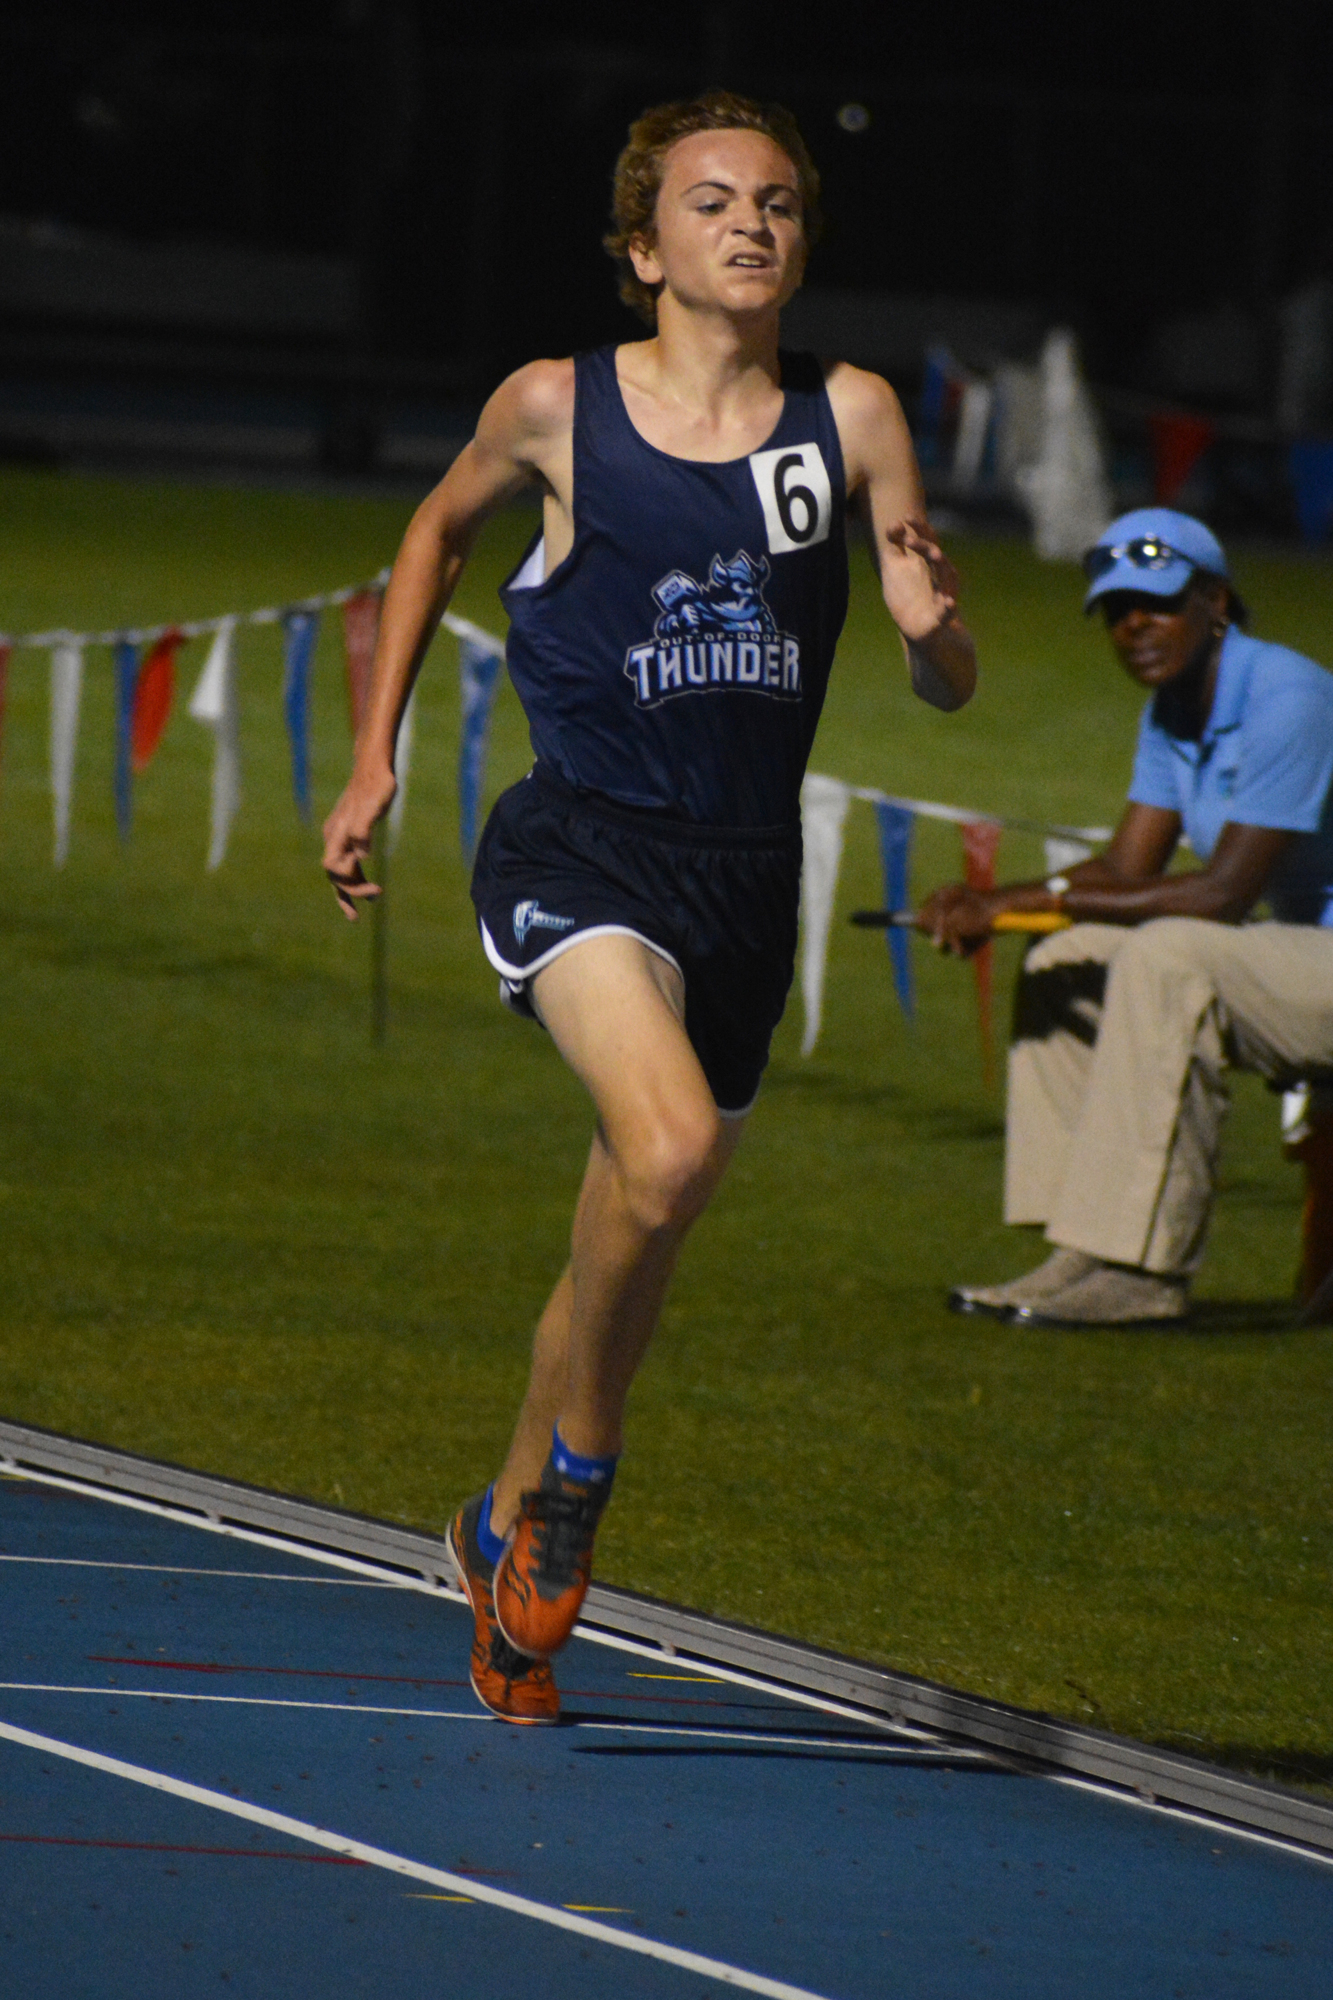 8. The Out-of-Door Academy freshman Tristan McWilliam broke the school record in the 3200-meter race — then broke his own record.